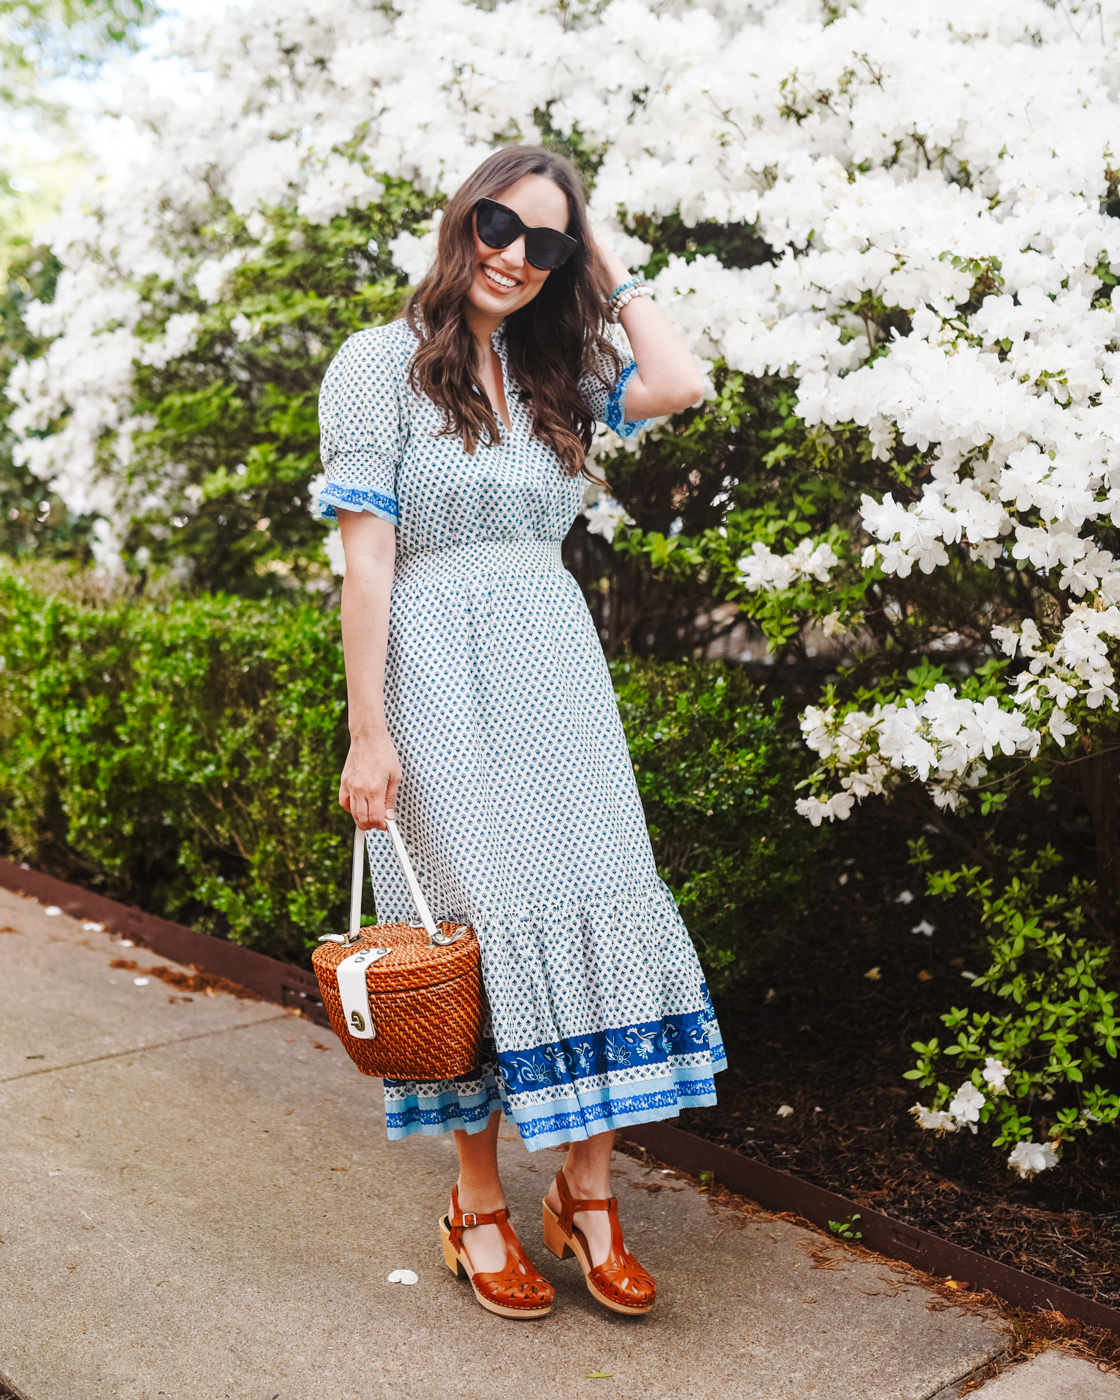 j crew smocked dress with swedish hasbeen clogs and a basket purse